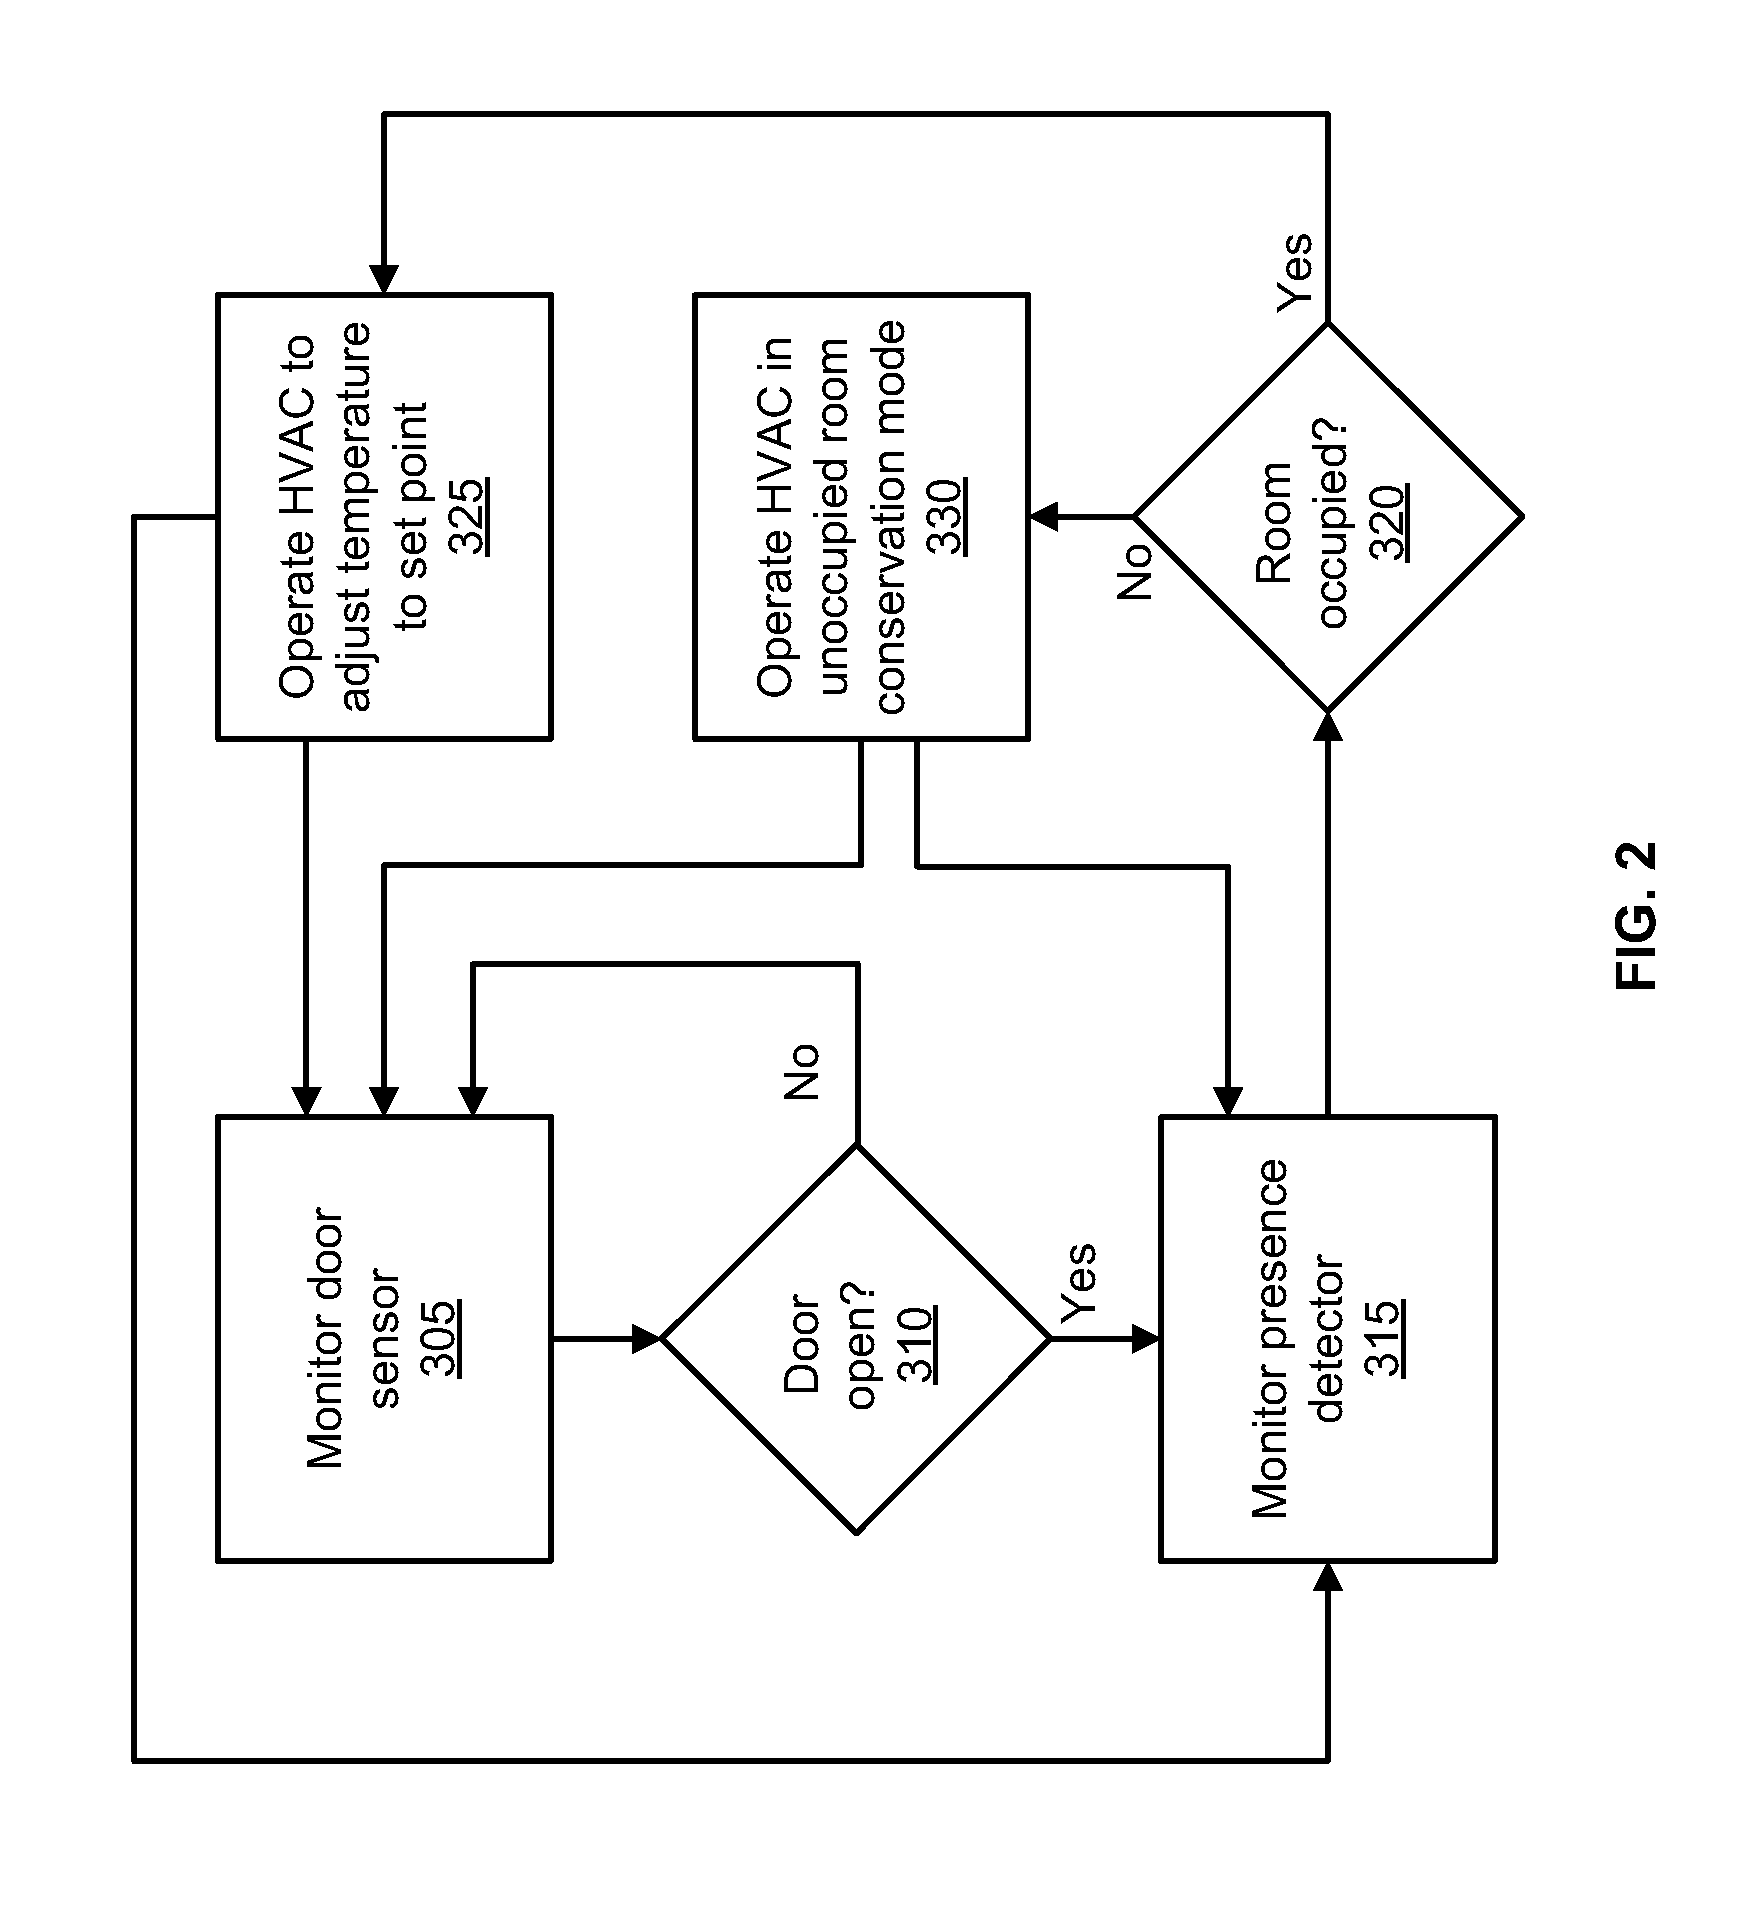 Systems and methods for controlling the temperature of a room based on occupancy